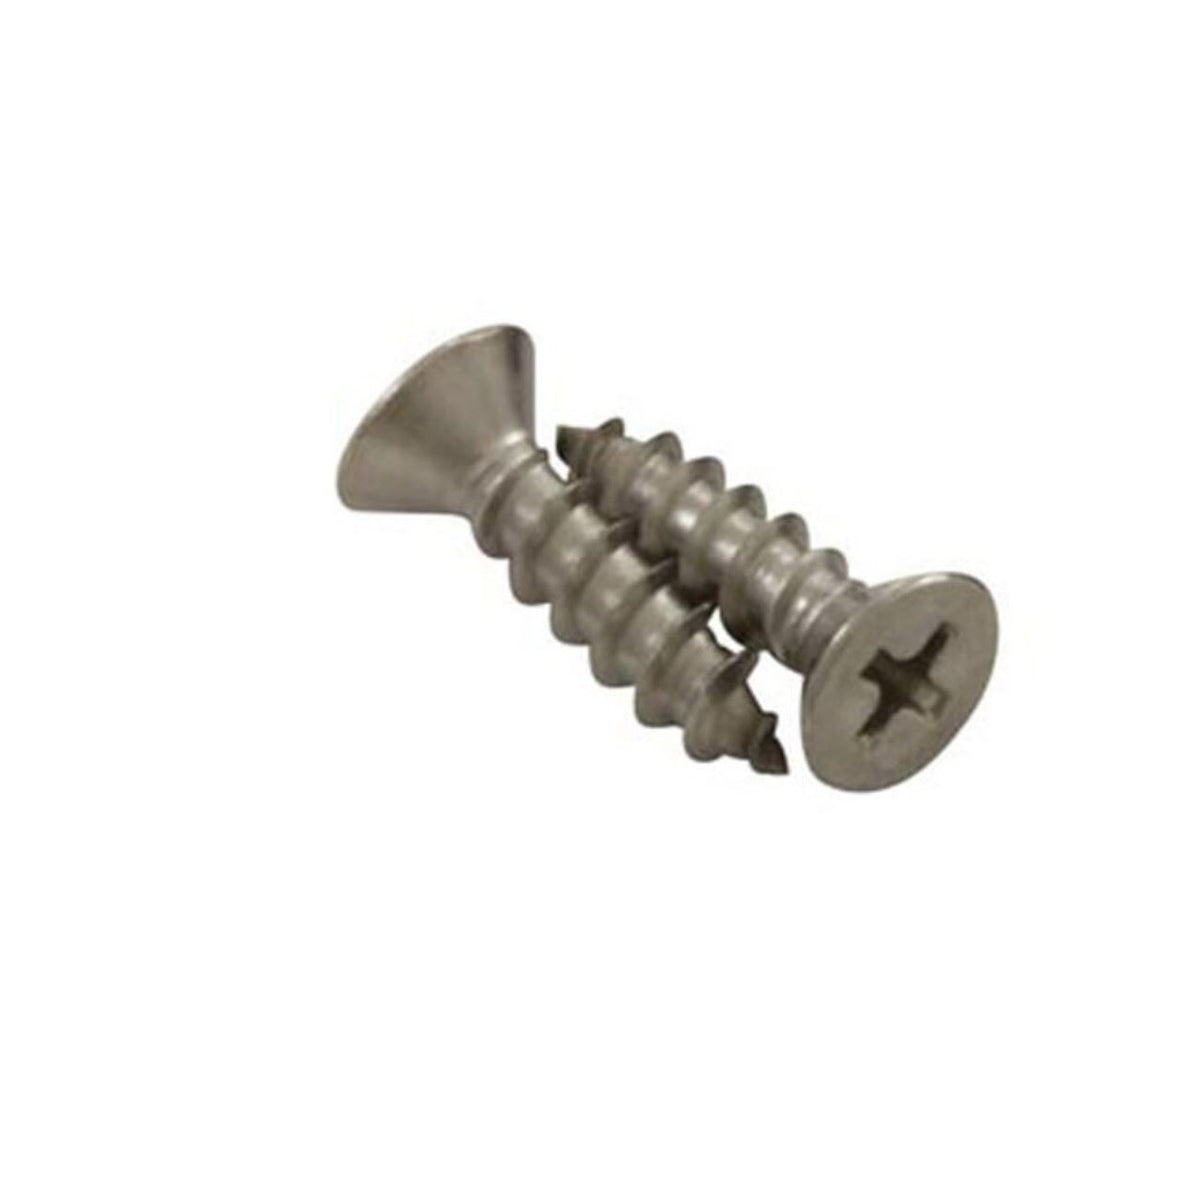 Stainless Steel Aquastar Screw Kit - Essential for Your Project